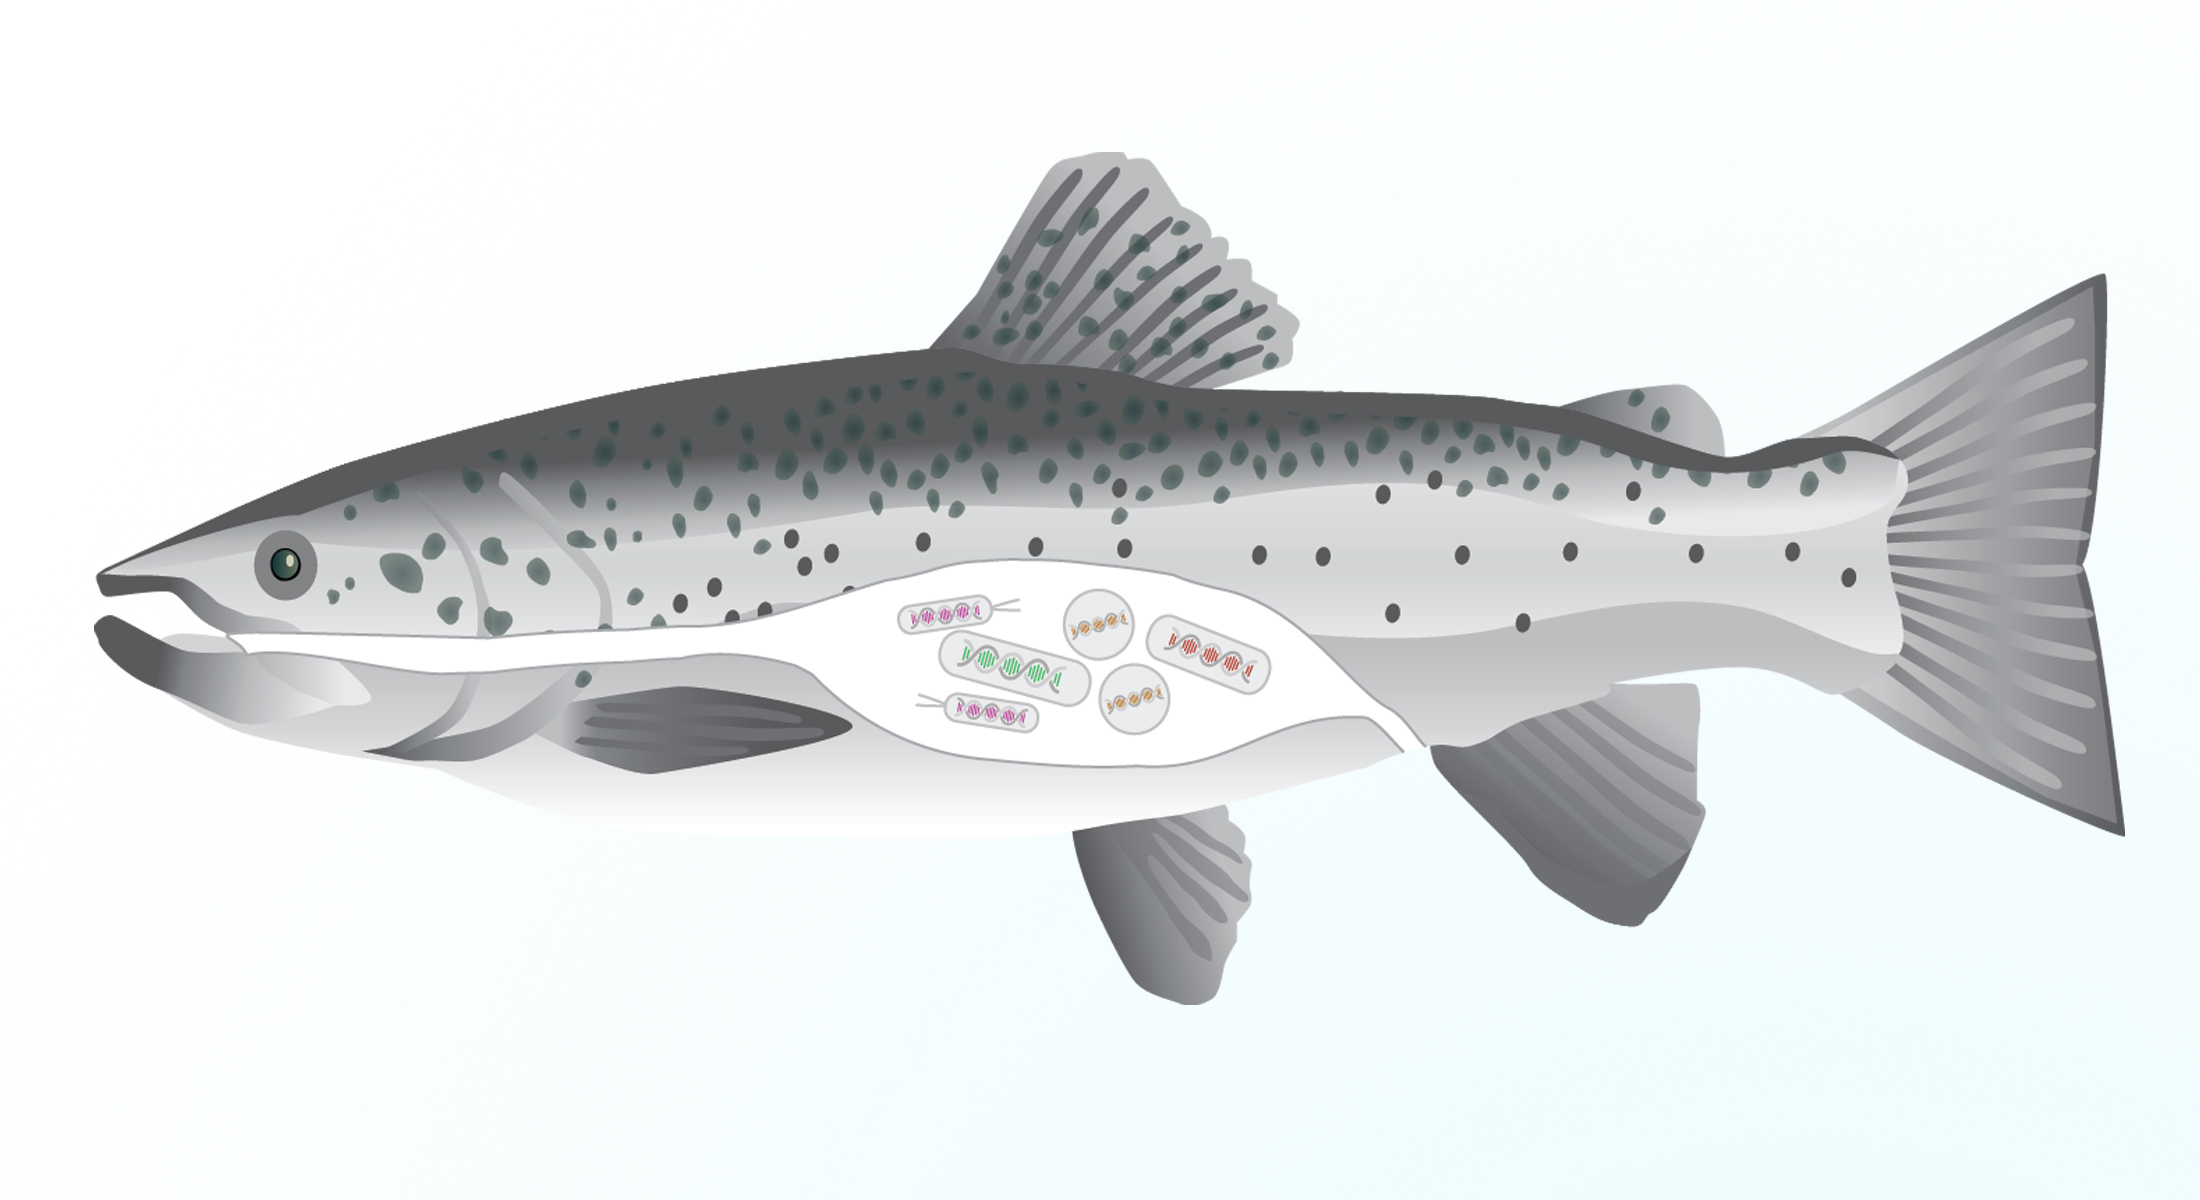 Illustration of a salmon and its gut microorganisms